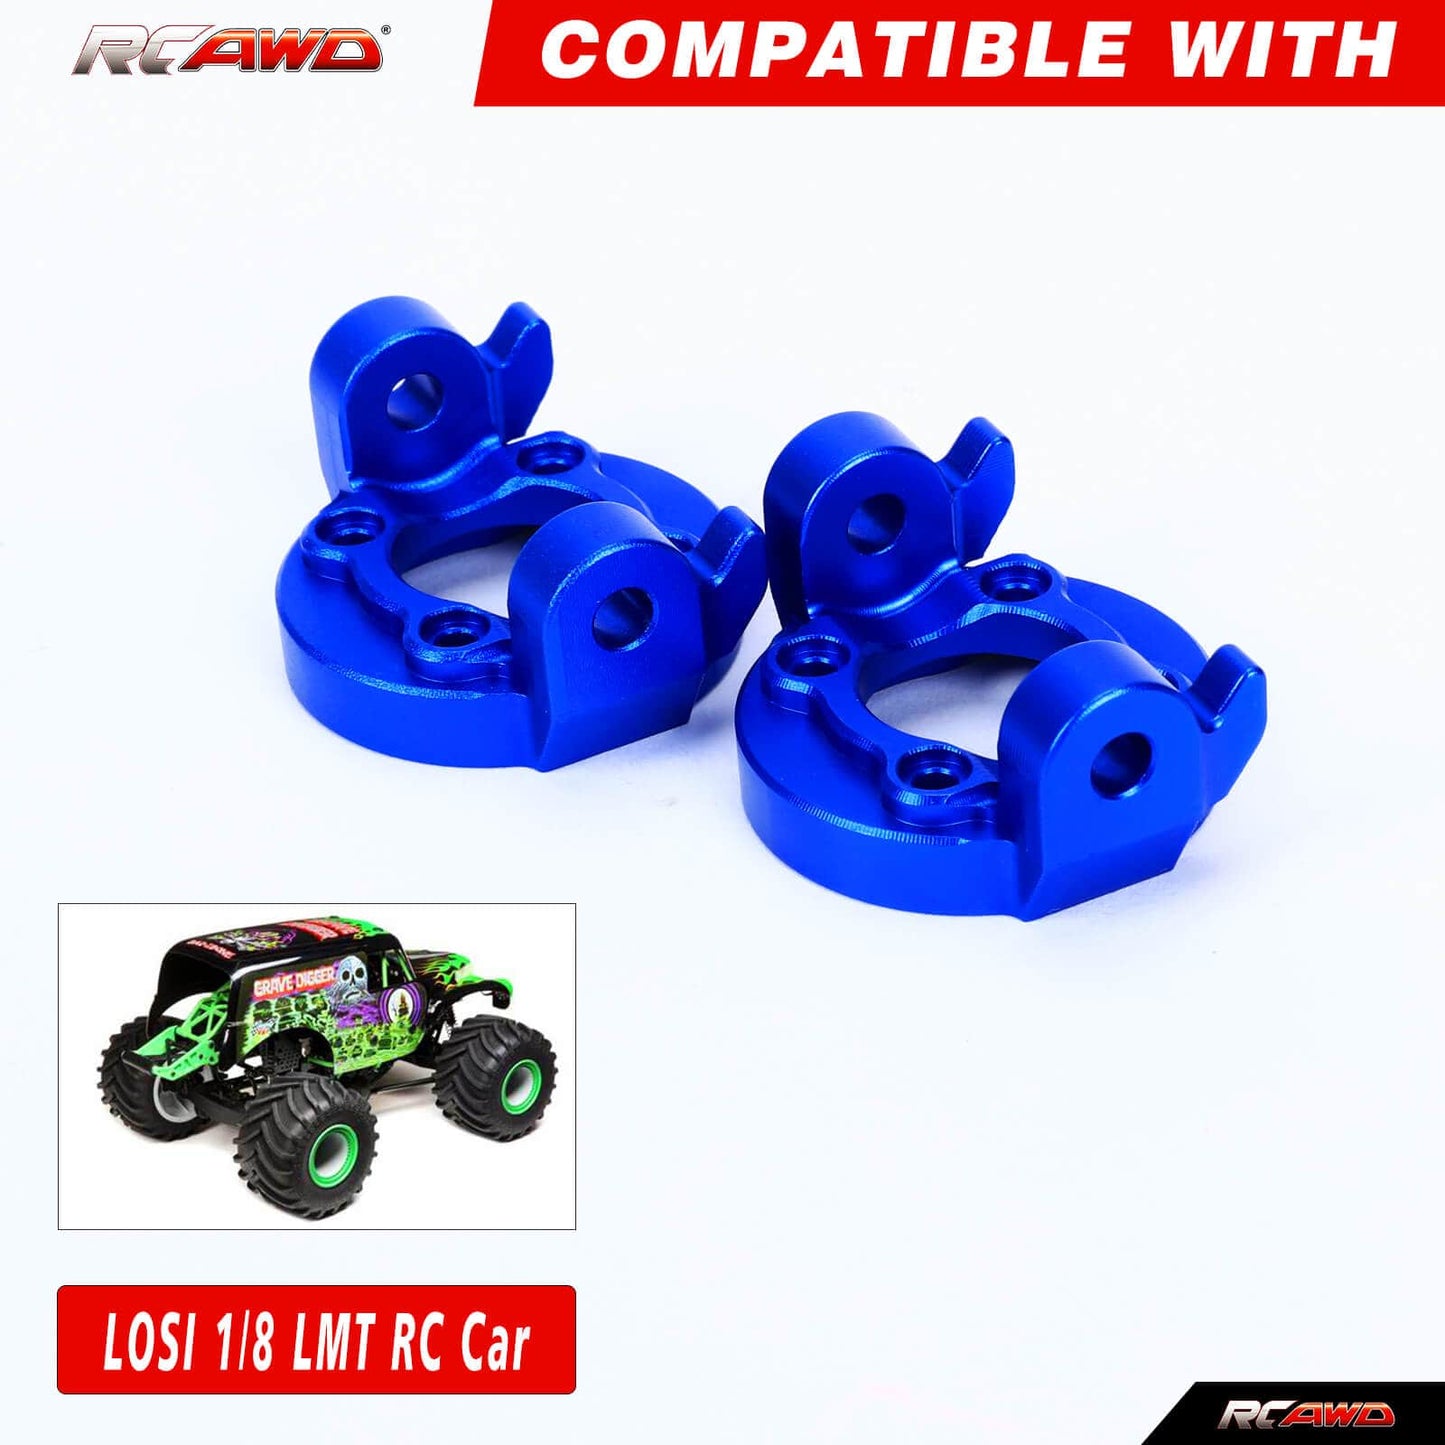 RCAWD LOSI 1/8 LMT RCAWD Losi Upgrades Spindle Carrier Set for1/8 LMT LOS244003